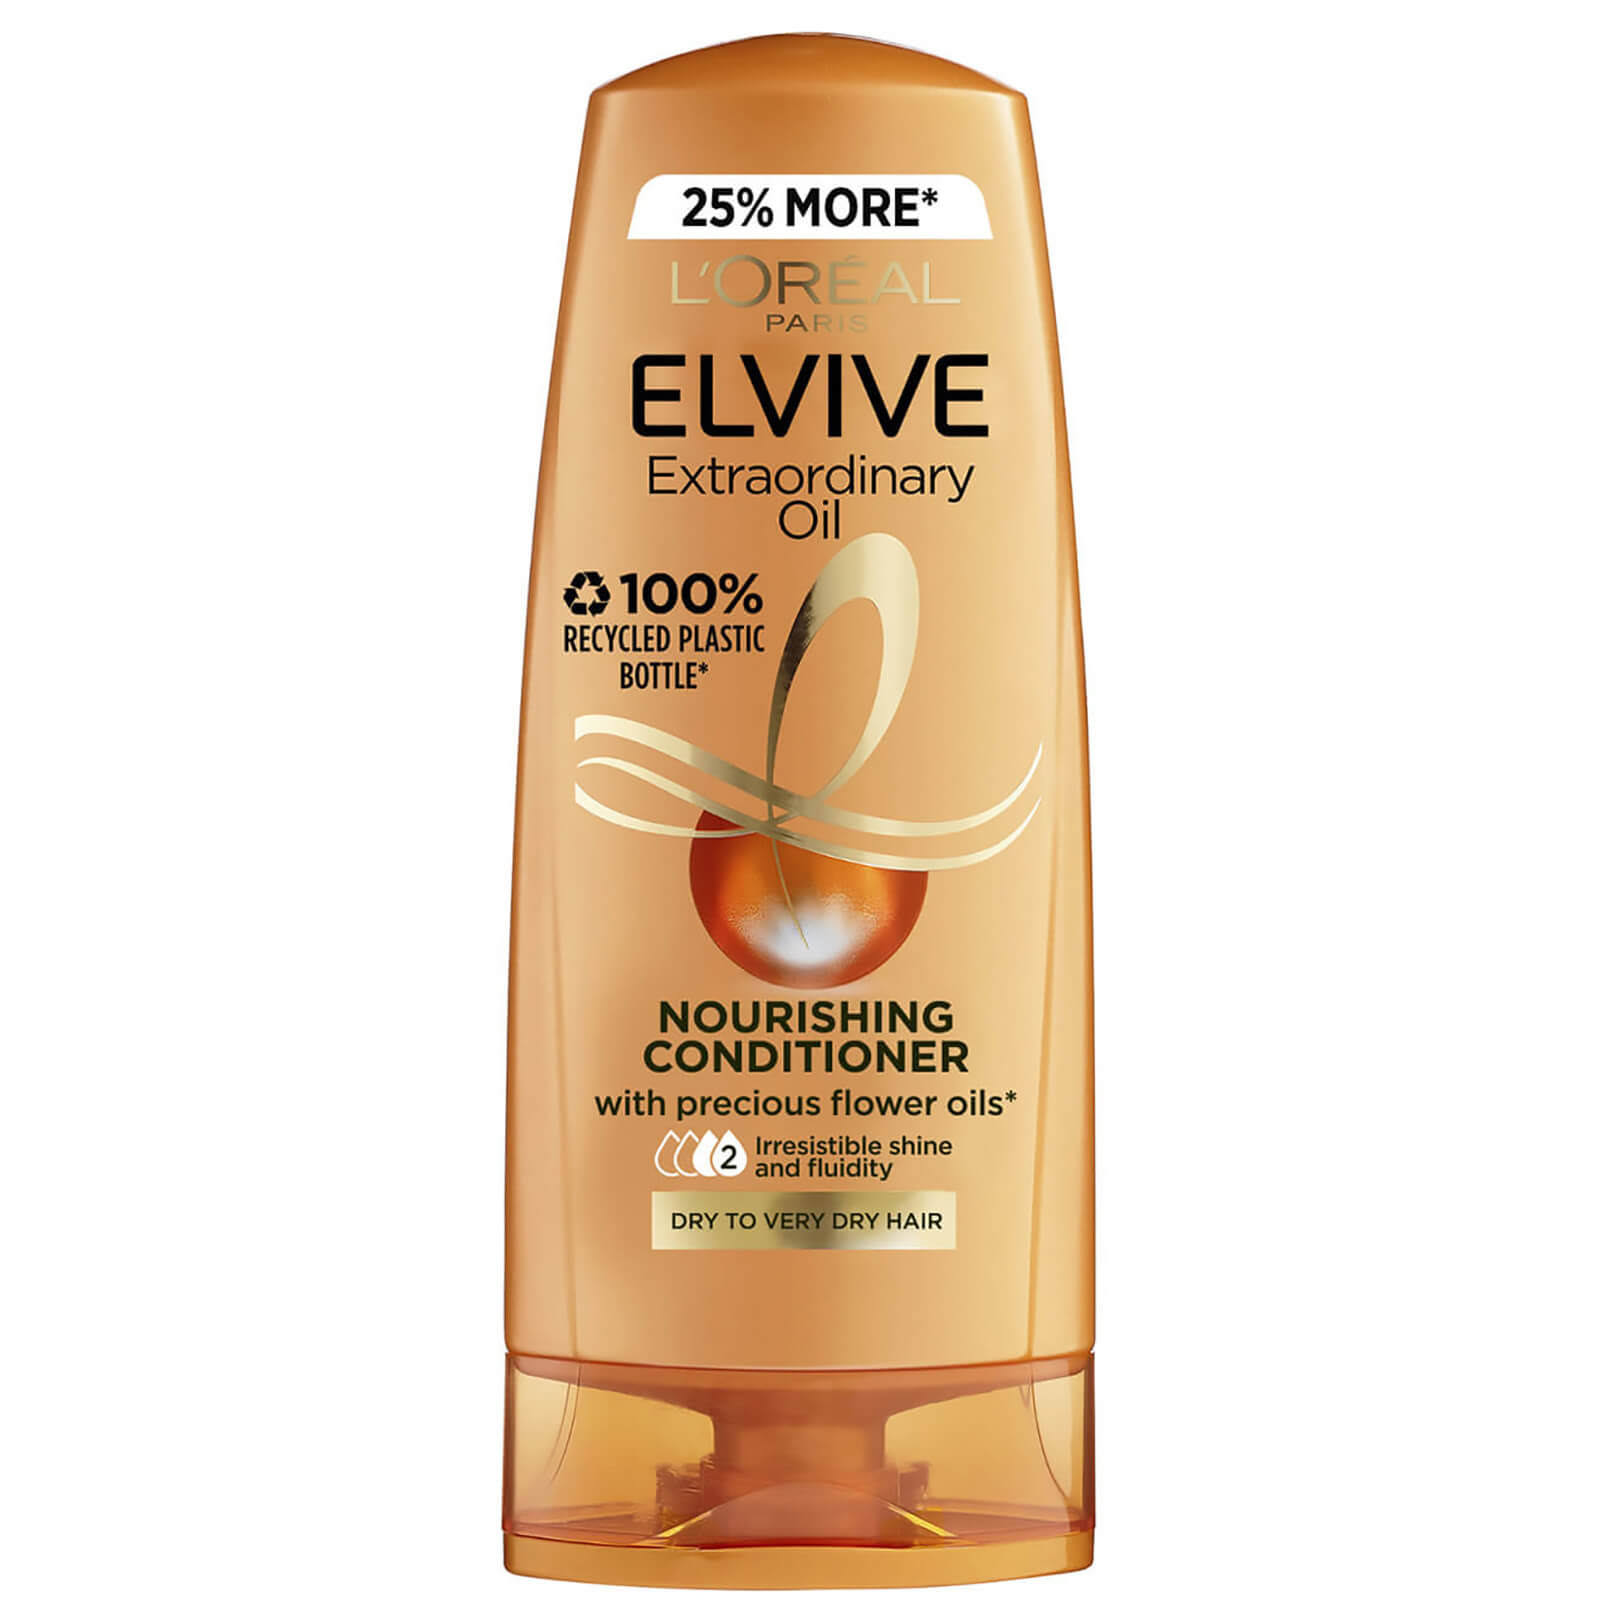 L'oreal Elvive Extraordinary Oil Dry Hair Conditioner 500ml